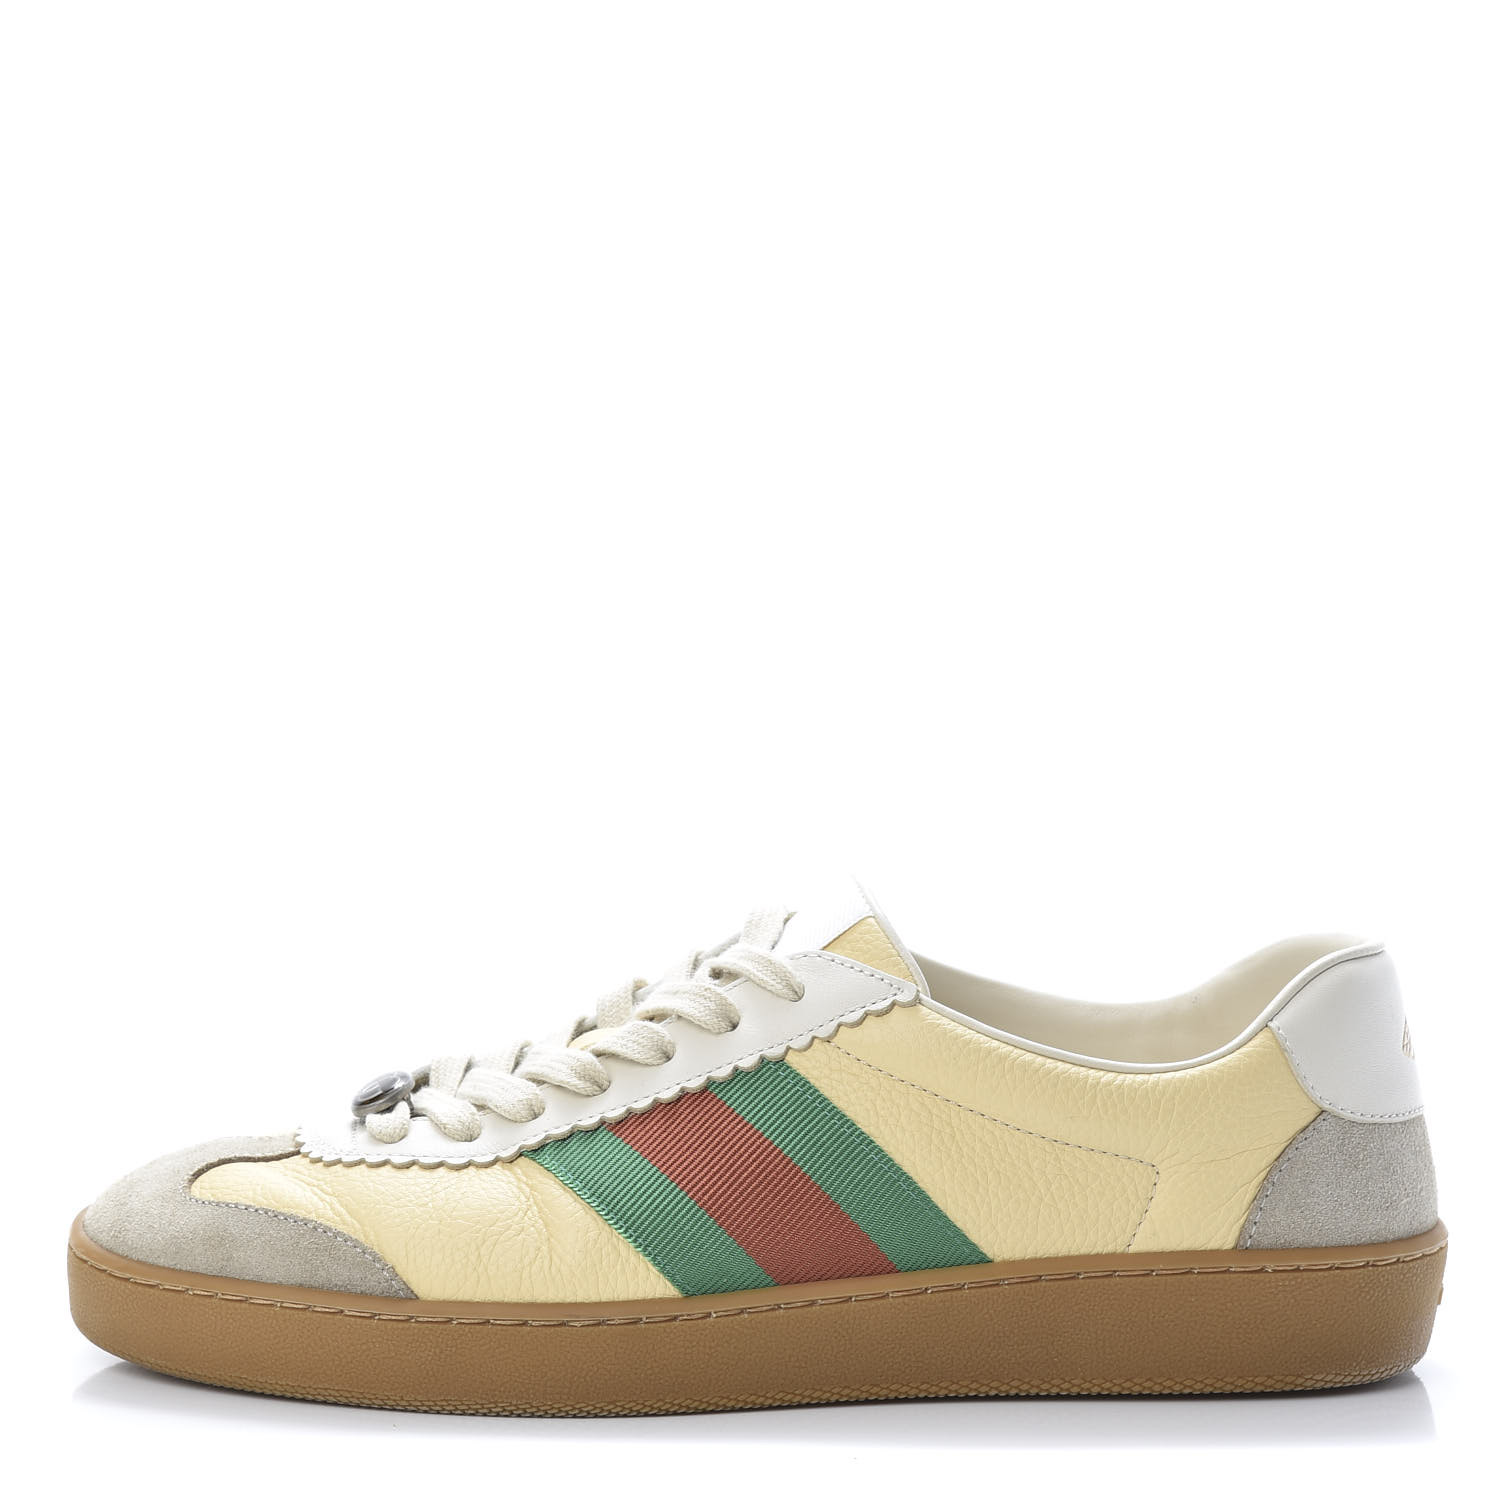 GUCCI Calfskin Suede Web Mens G74 Sneakers 8 Oatmeal White Sand 657642 ...